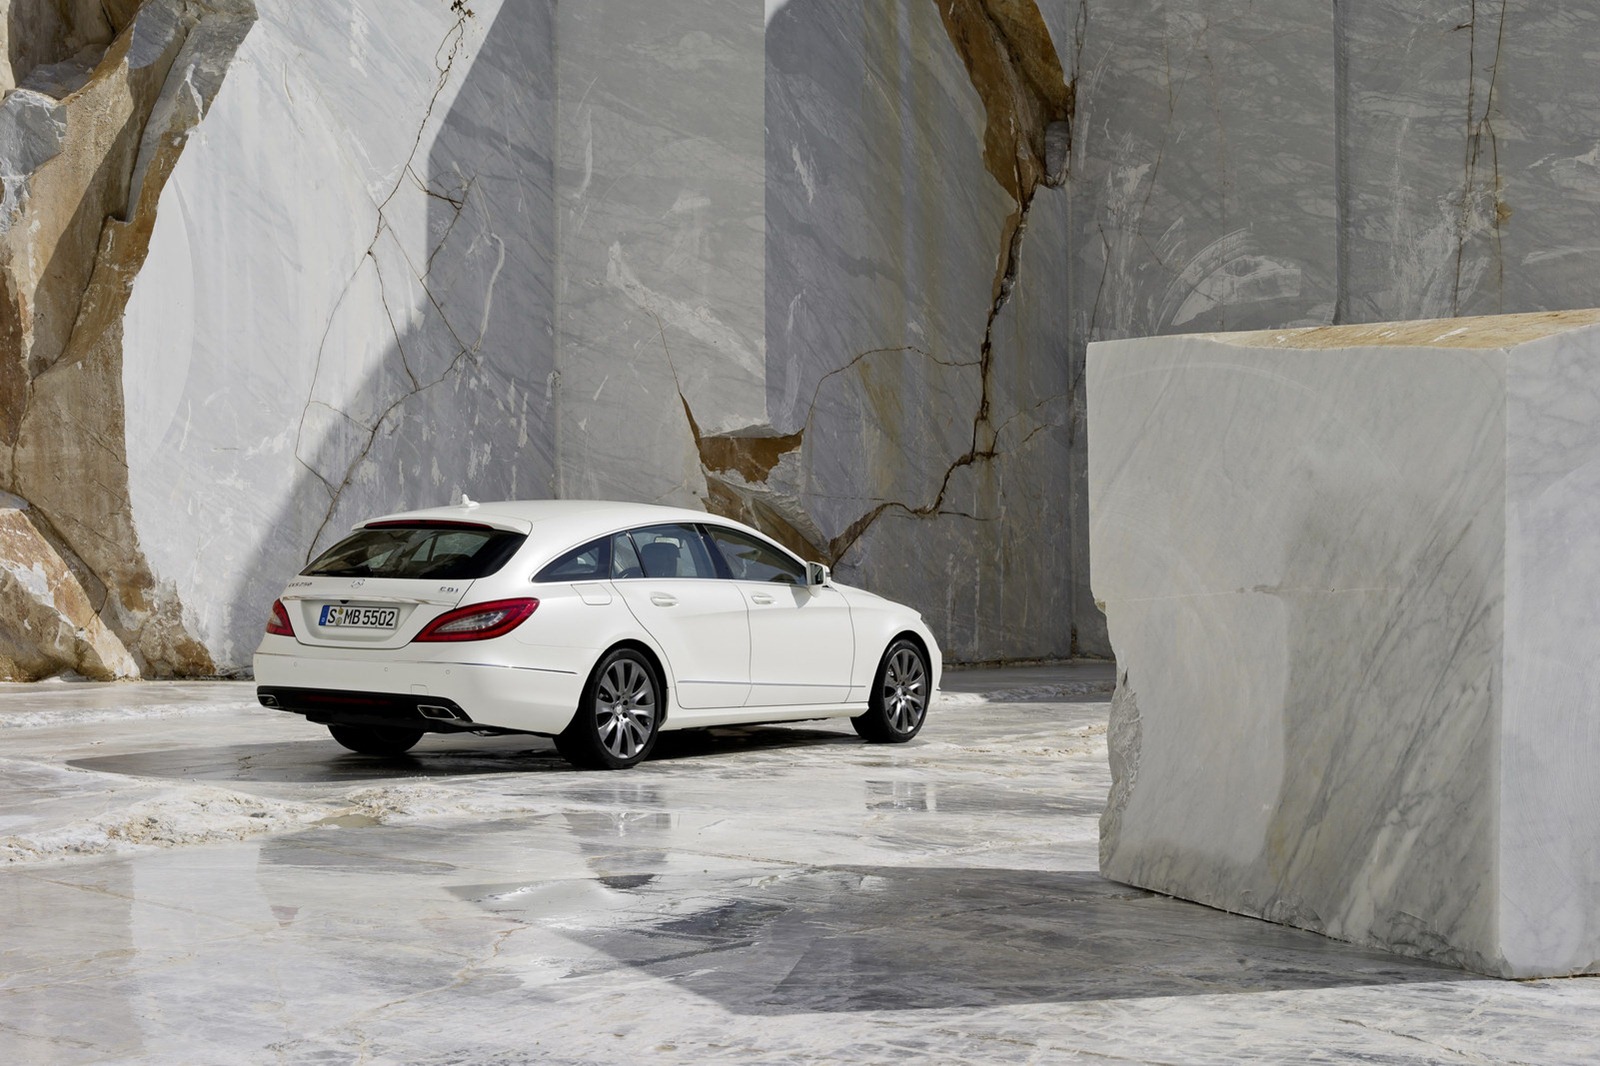 Mercedes CLS Shooting Brake nuove immagini